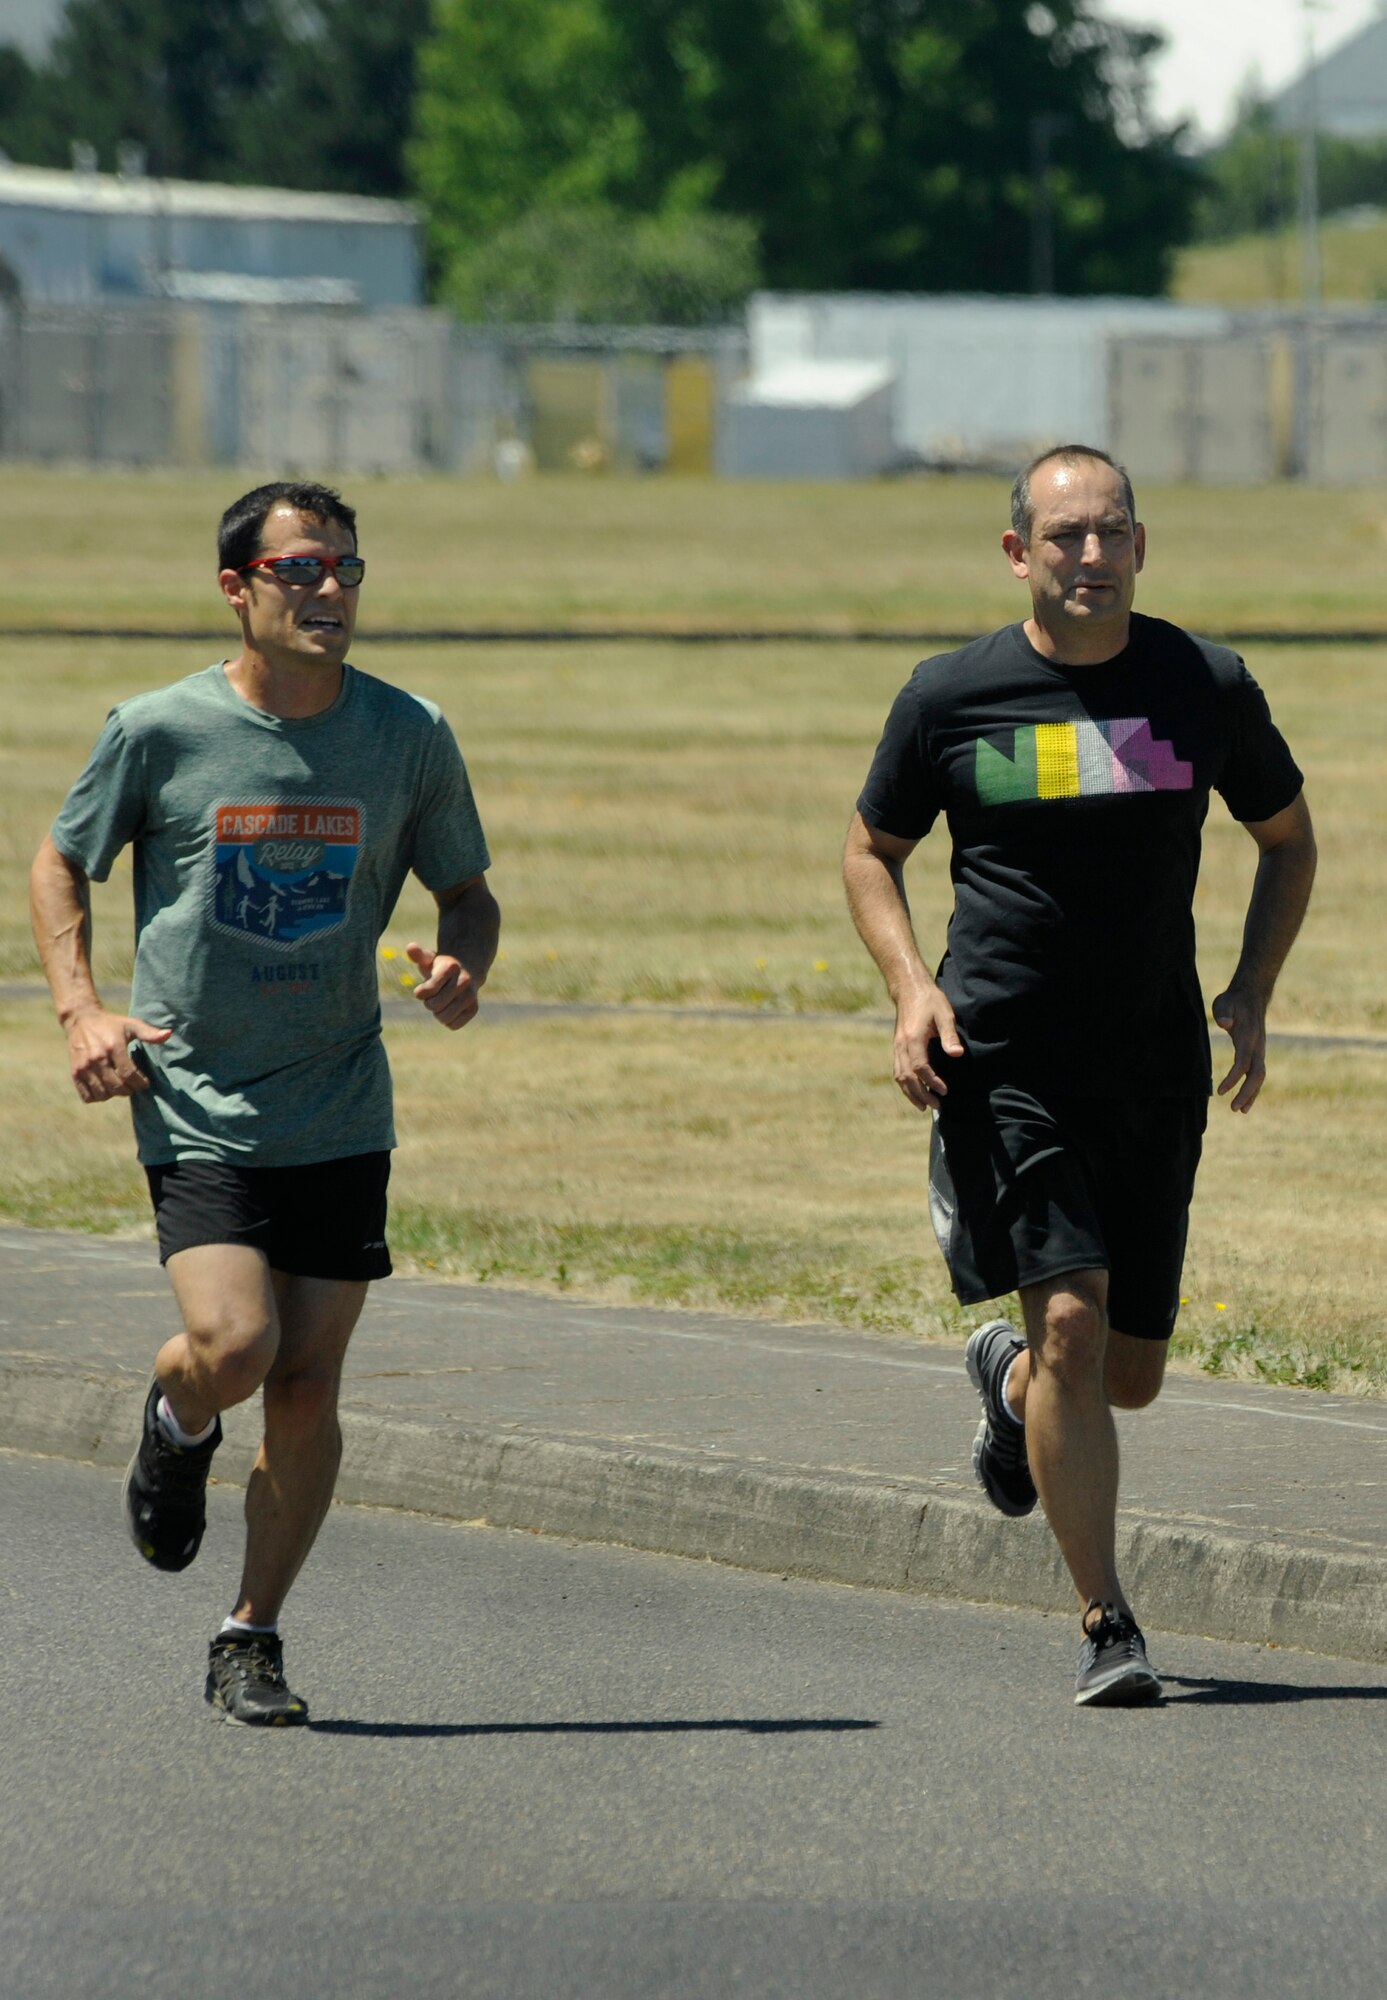 Oregon Air National Guard Col. Matthew Schuster, (right) Vice Commander, 142nd Fighter Wing and Executive Officer Maj. Frank Page (left) take off for an afternoon run at the Portland Air National Guard Base, Portland, Ore., July 3, 2013. Schuster’s workout routine helps him maintain a high level of fitness as an F-15 Eagle pilot for the Oregon Air National Guard. (Air National Guard Photo by Tech. Sgt. John Hughel, 142nd Fighter Wing Public Affairs/released)